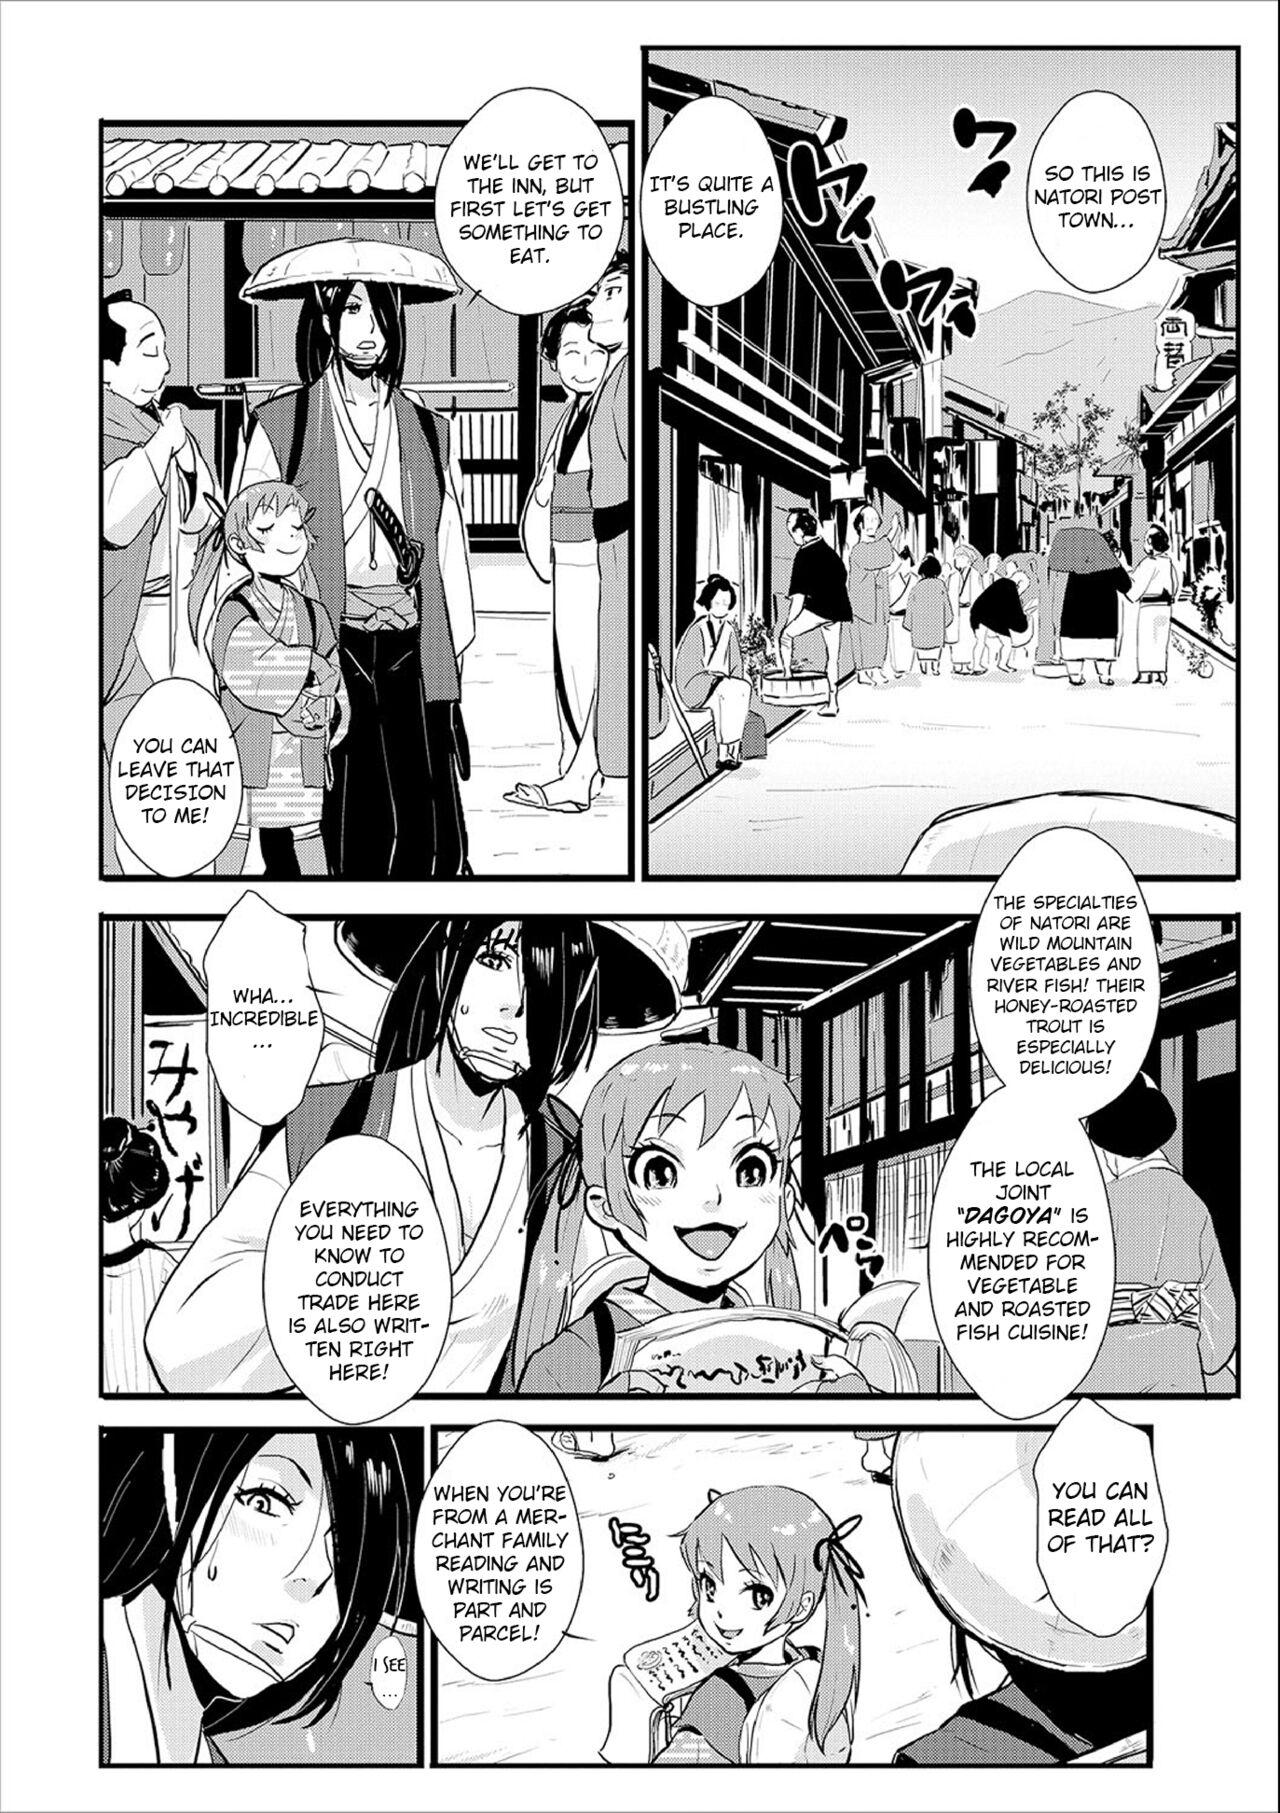 Knocked Up Samurai 02: The Post Town and the Ronin, Tied and Teased 3